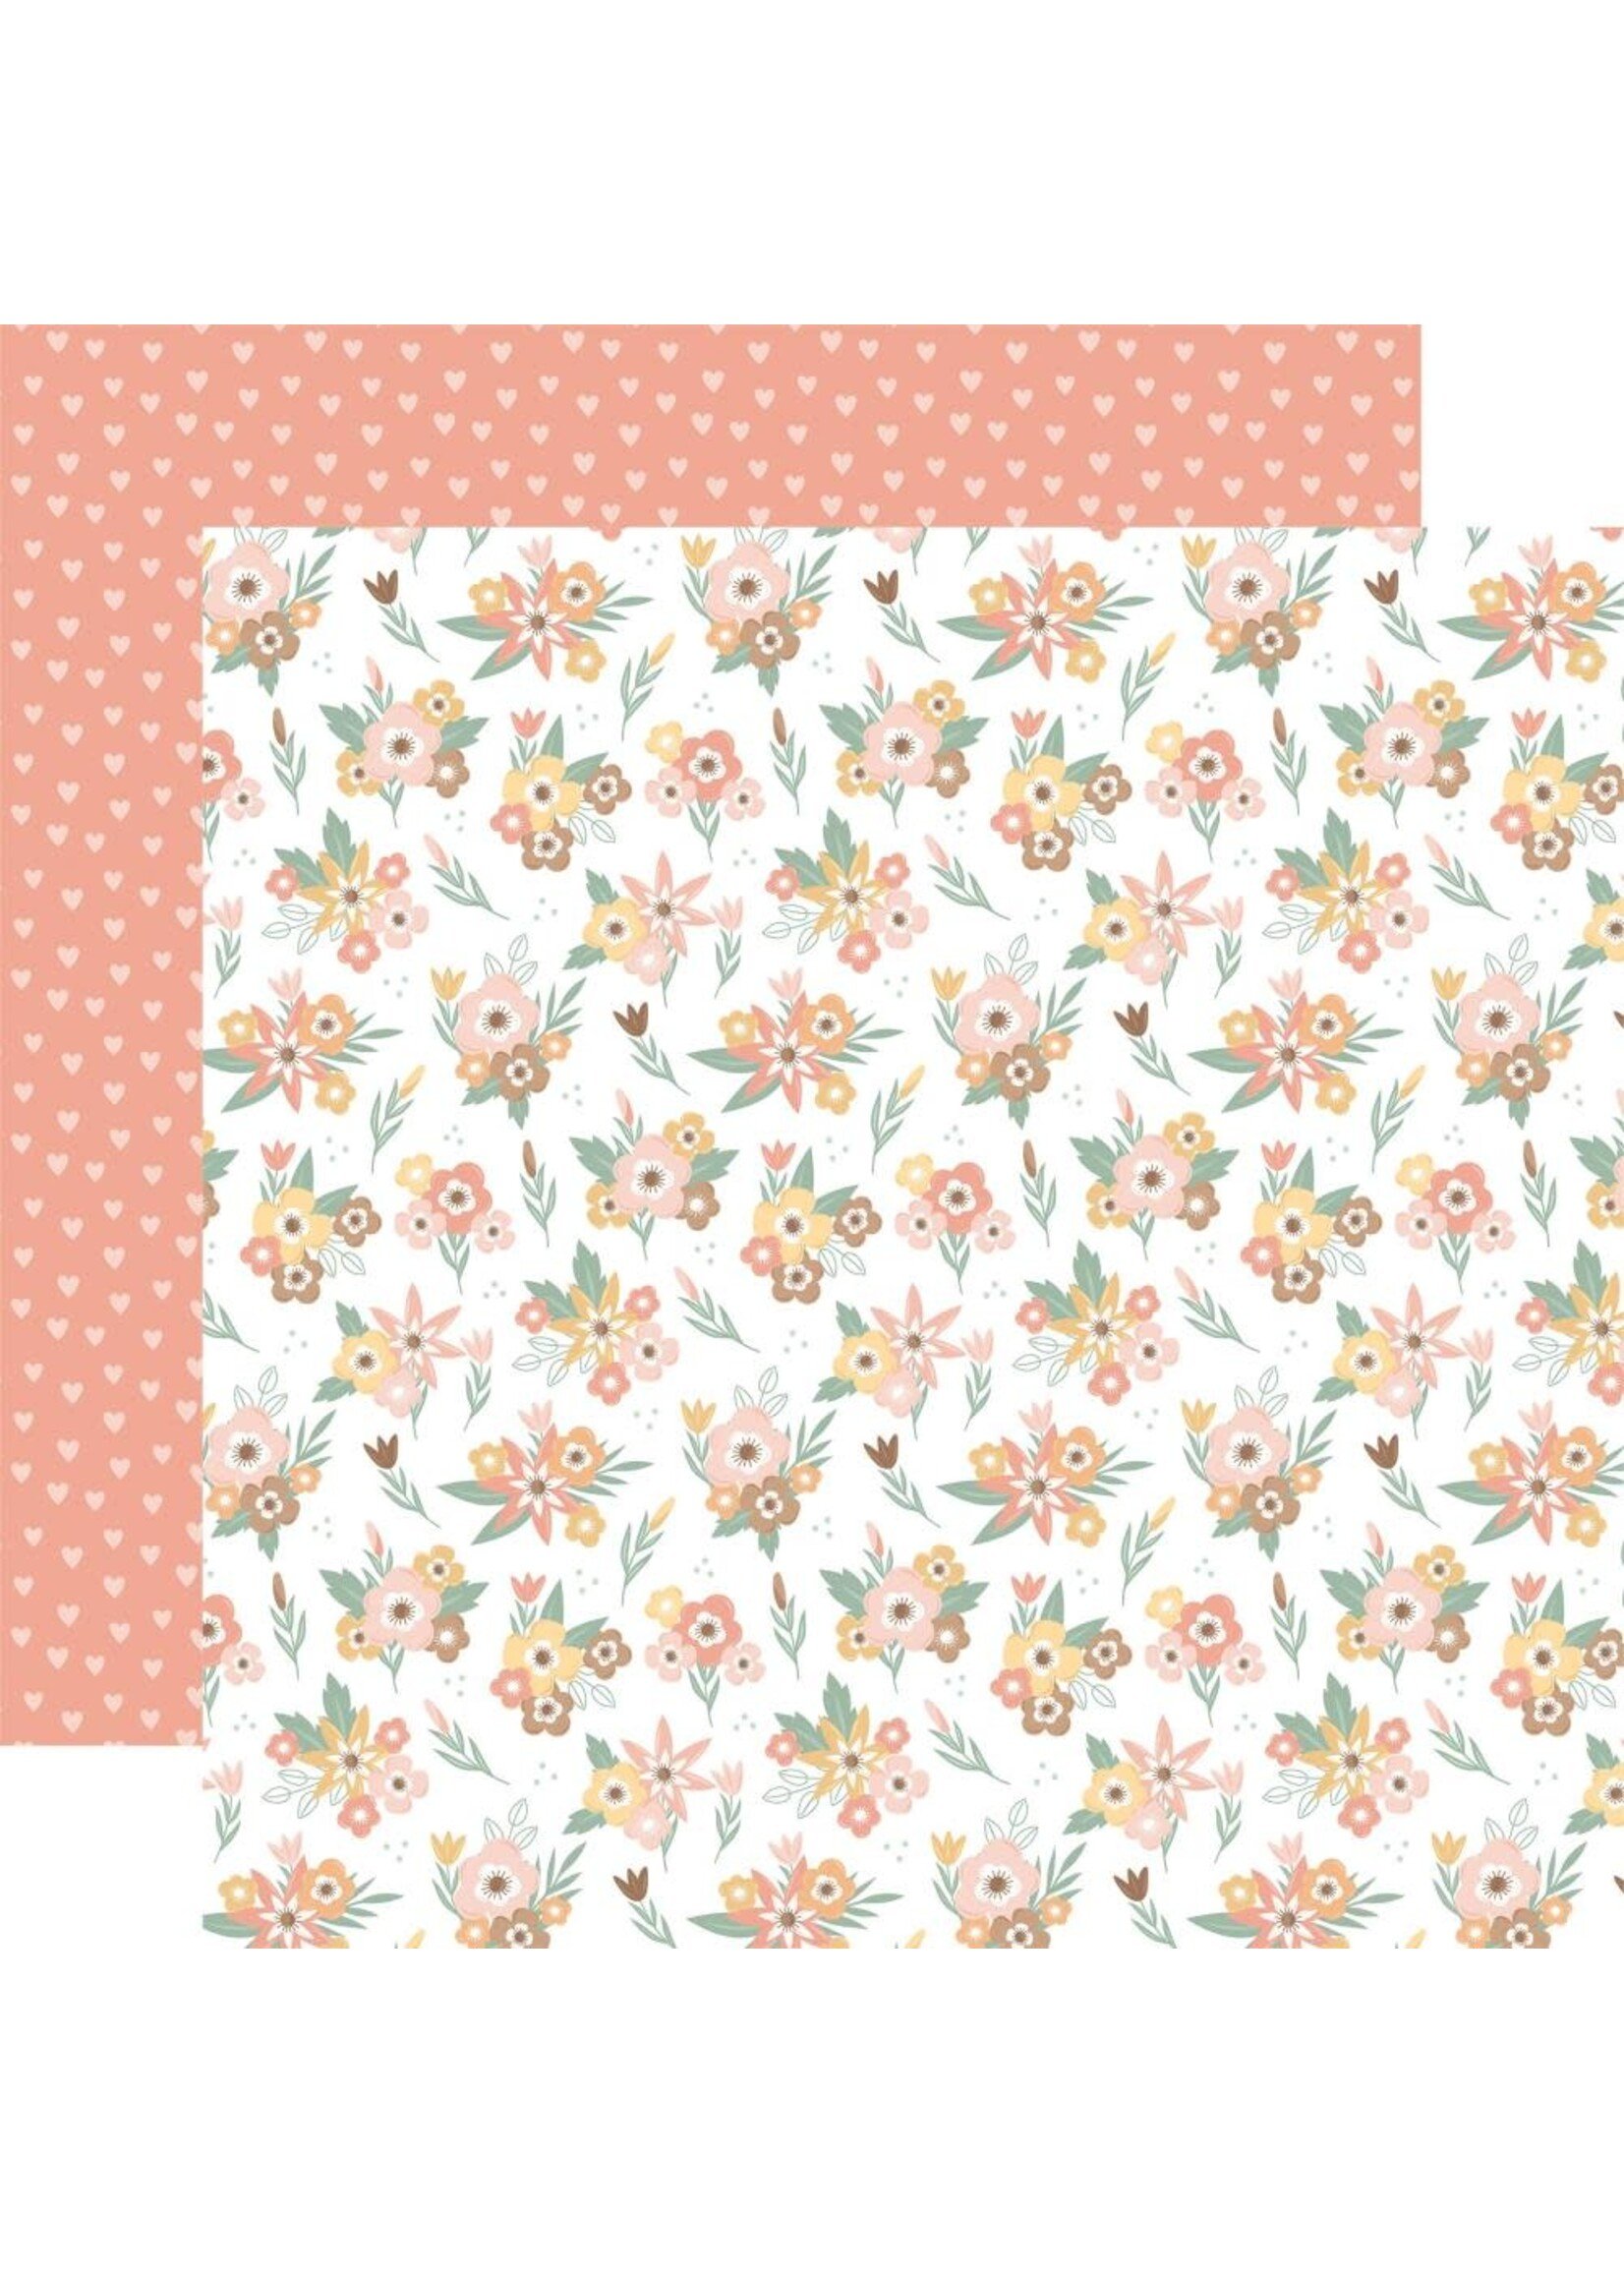 ECHO PARK PAPER COMPANY Our Baby Girl - Adorable Floral